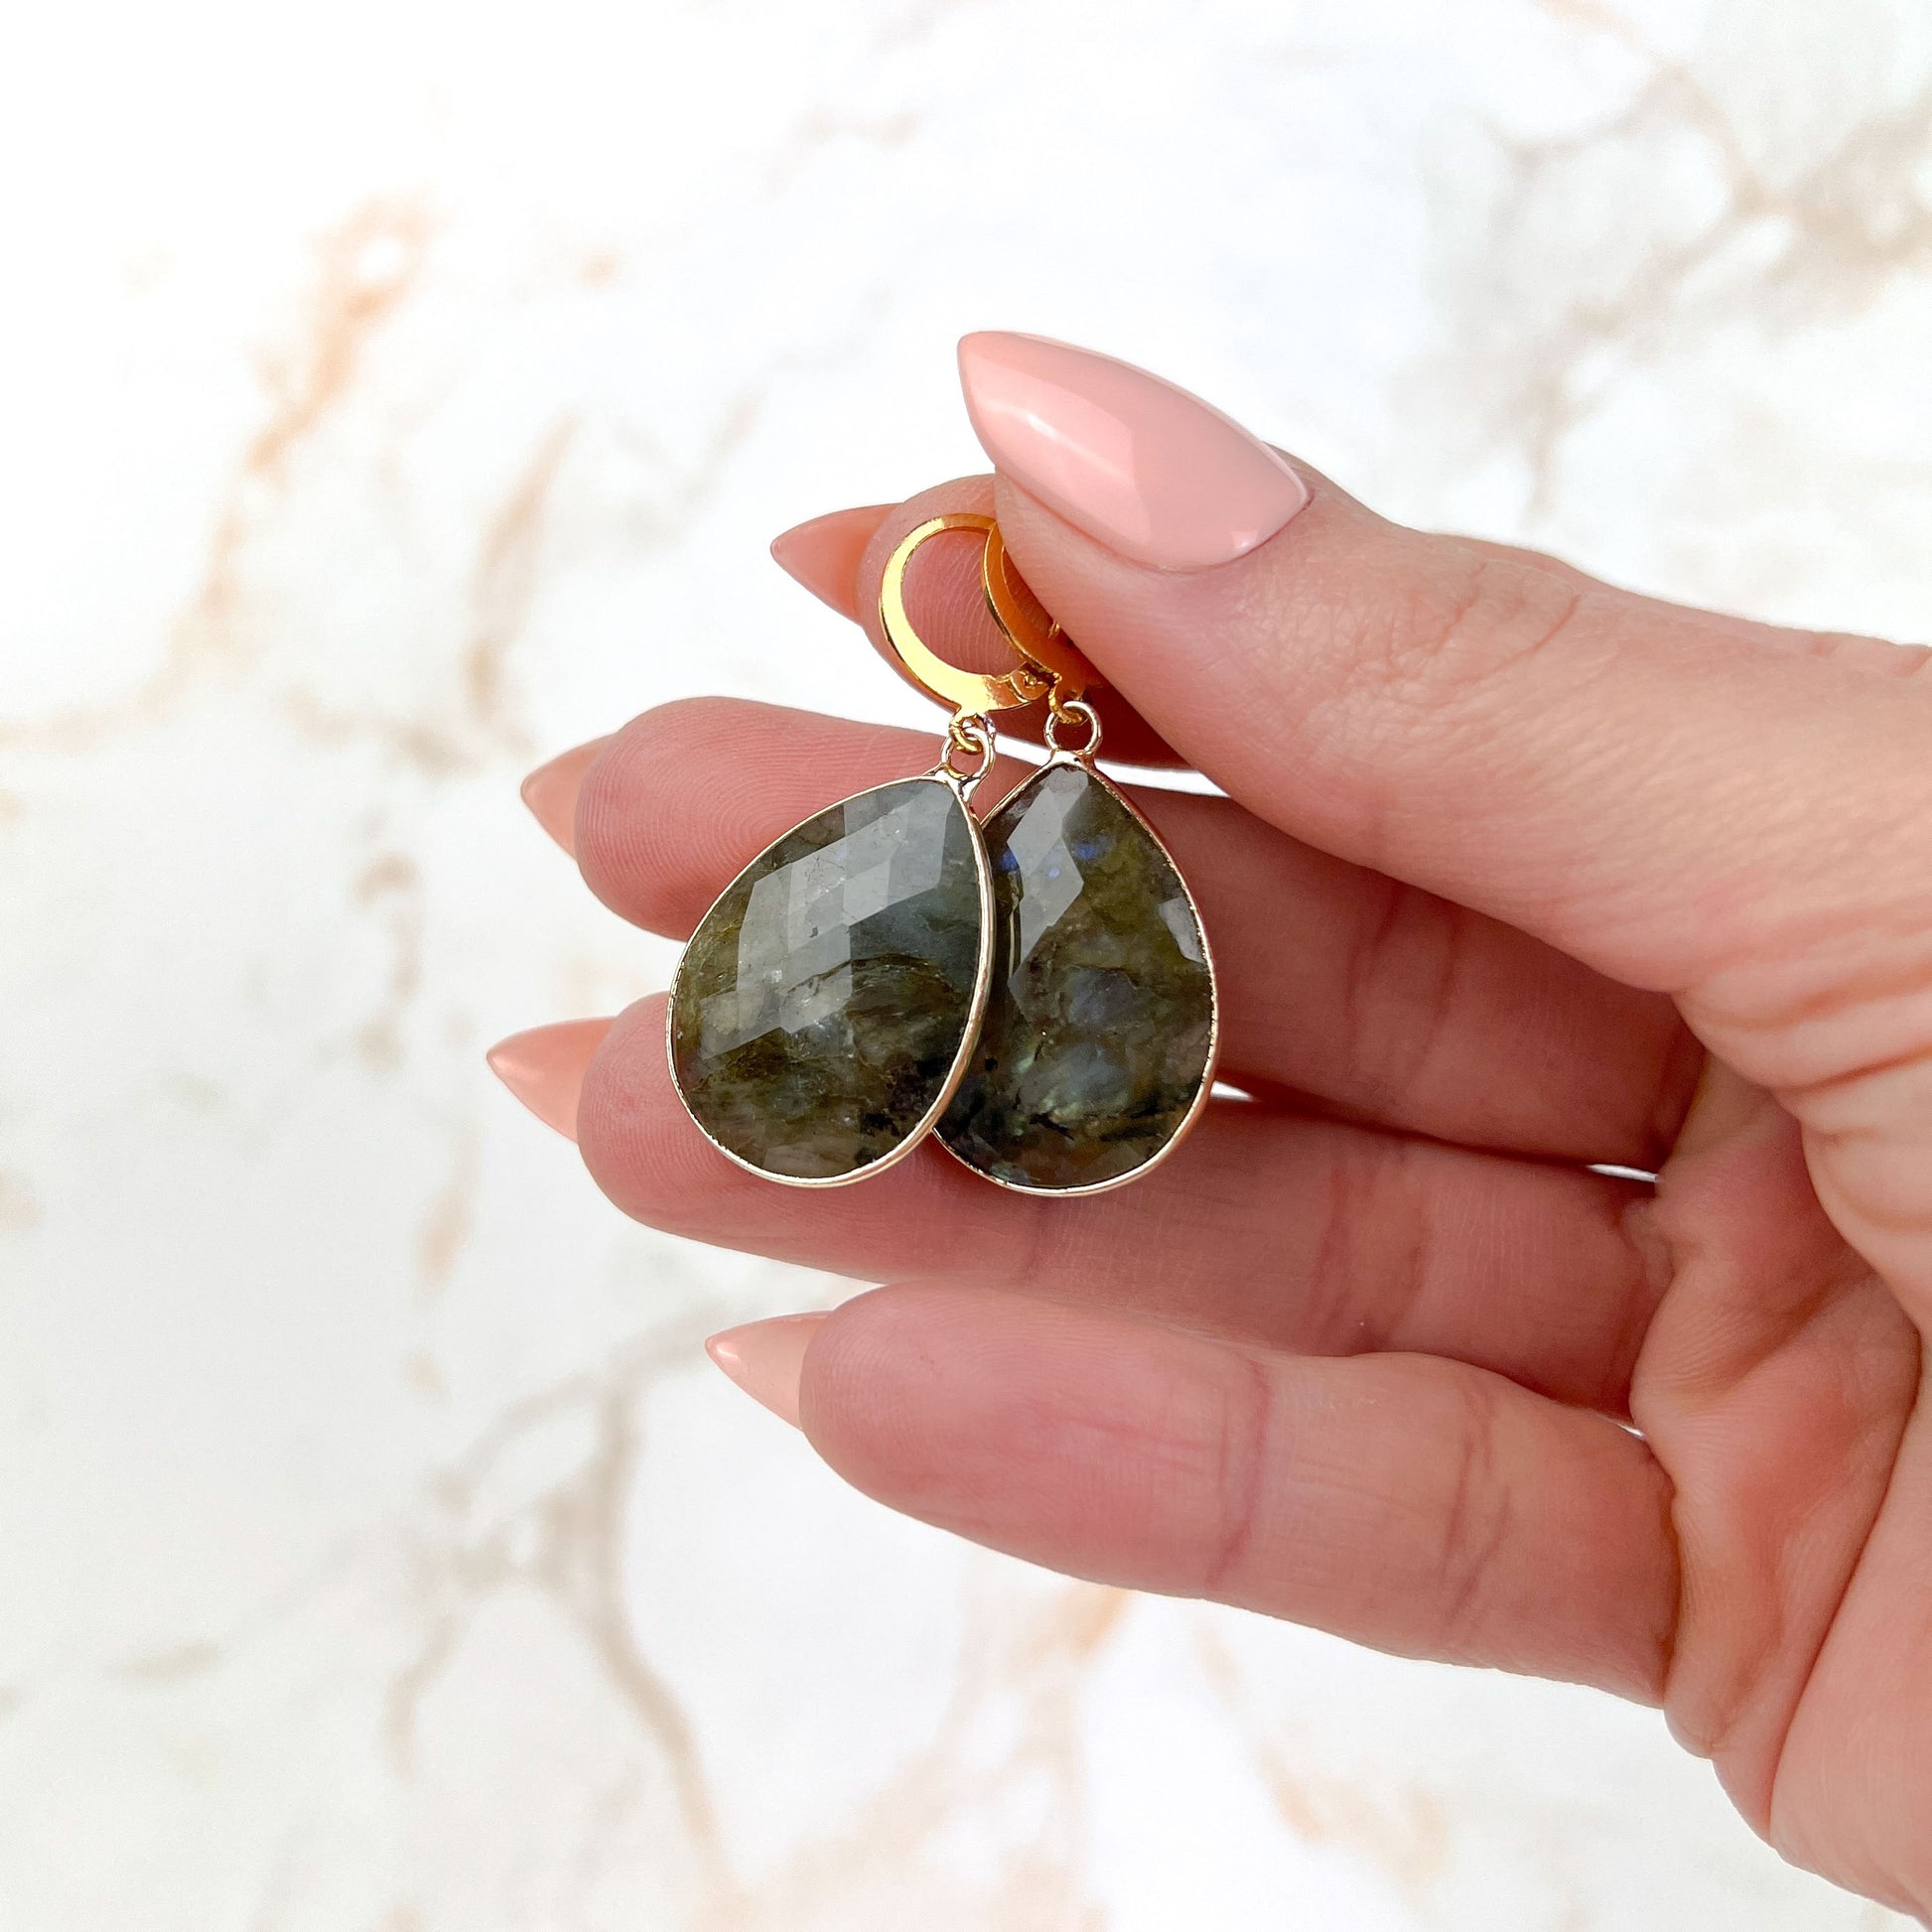 Faceted Labradorite earrings crystal jewelry earrings with gold-tone stainless steel closures dainty labradorite earrings